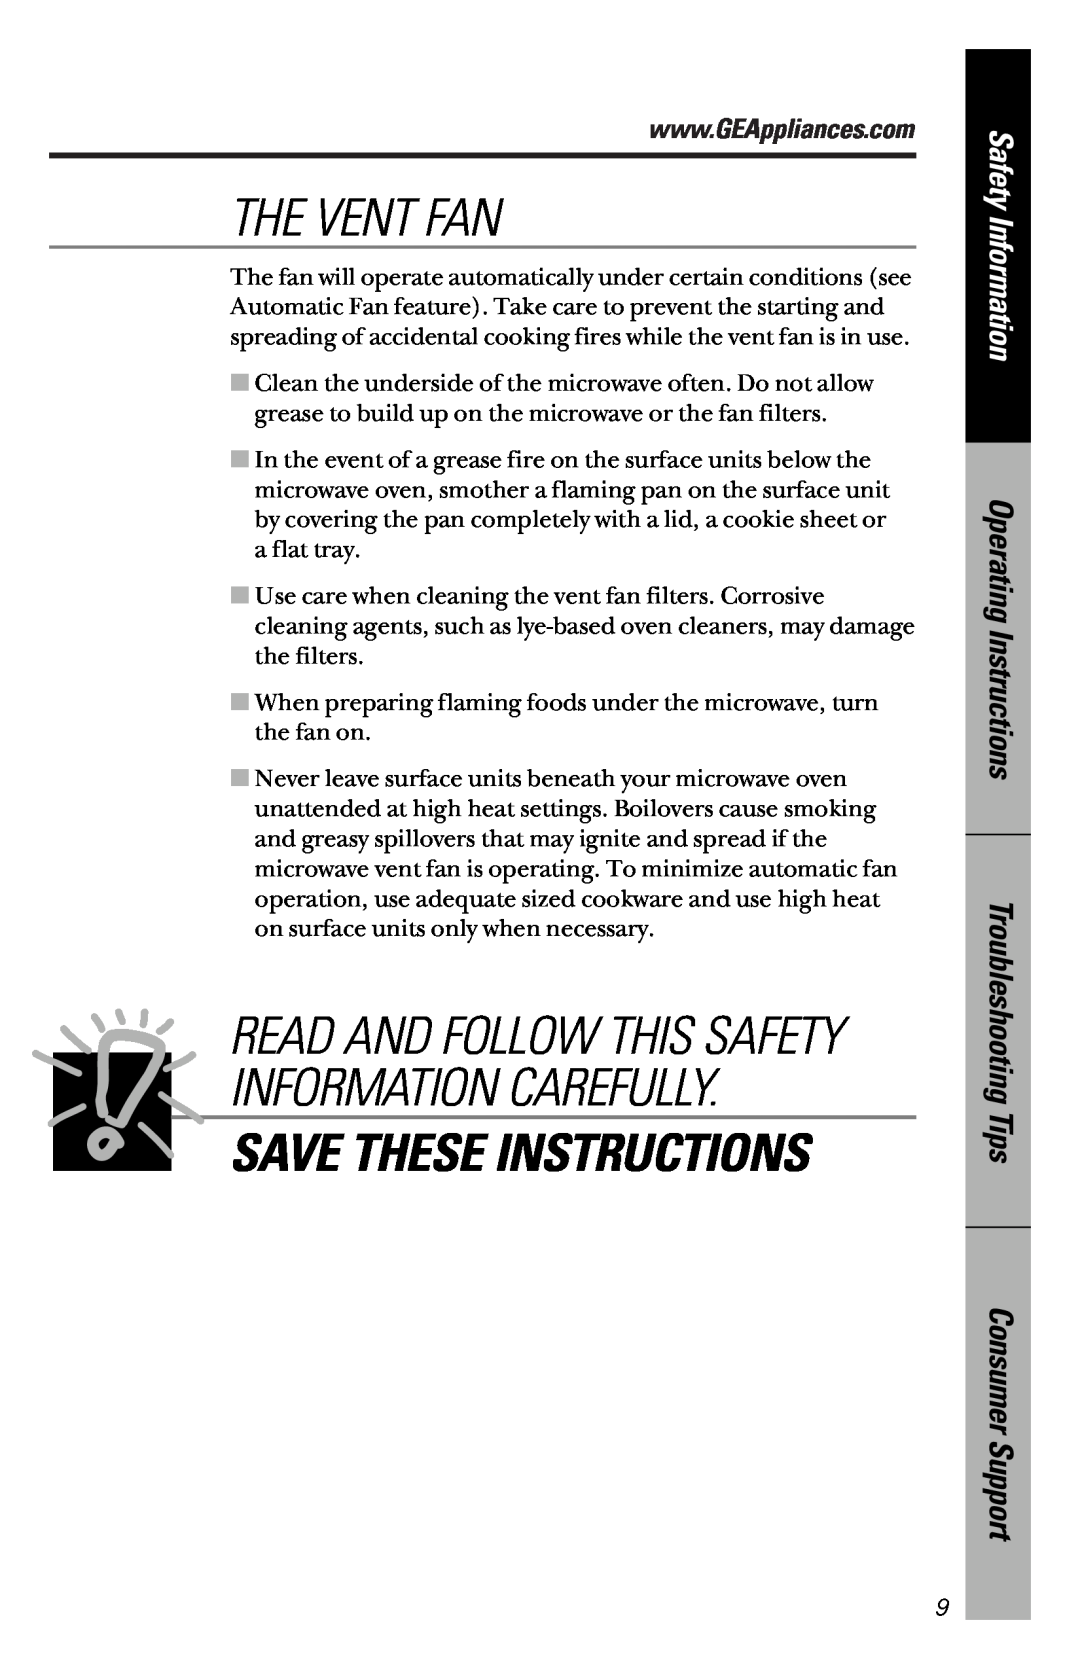 GE JVM1841 The Vent Fan, Save These Instructions, Read And Follow This Safety Information Carefully, Consumer Support 